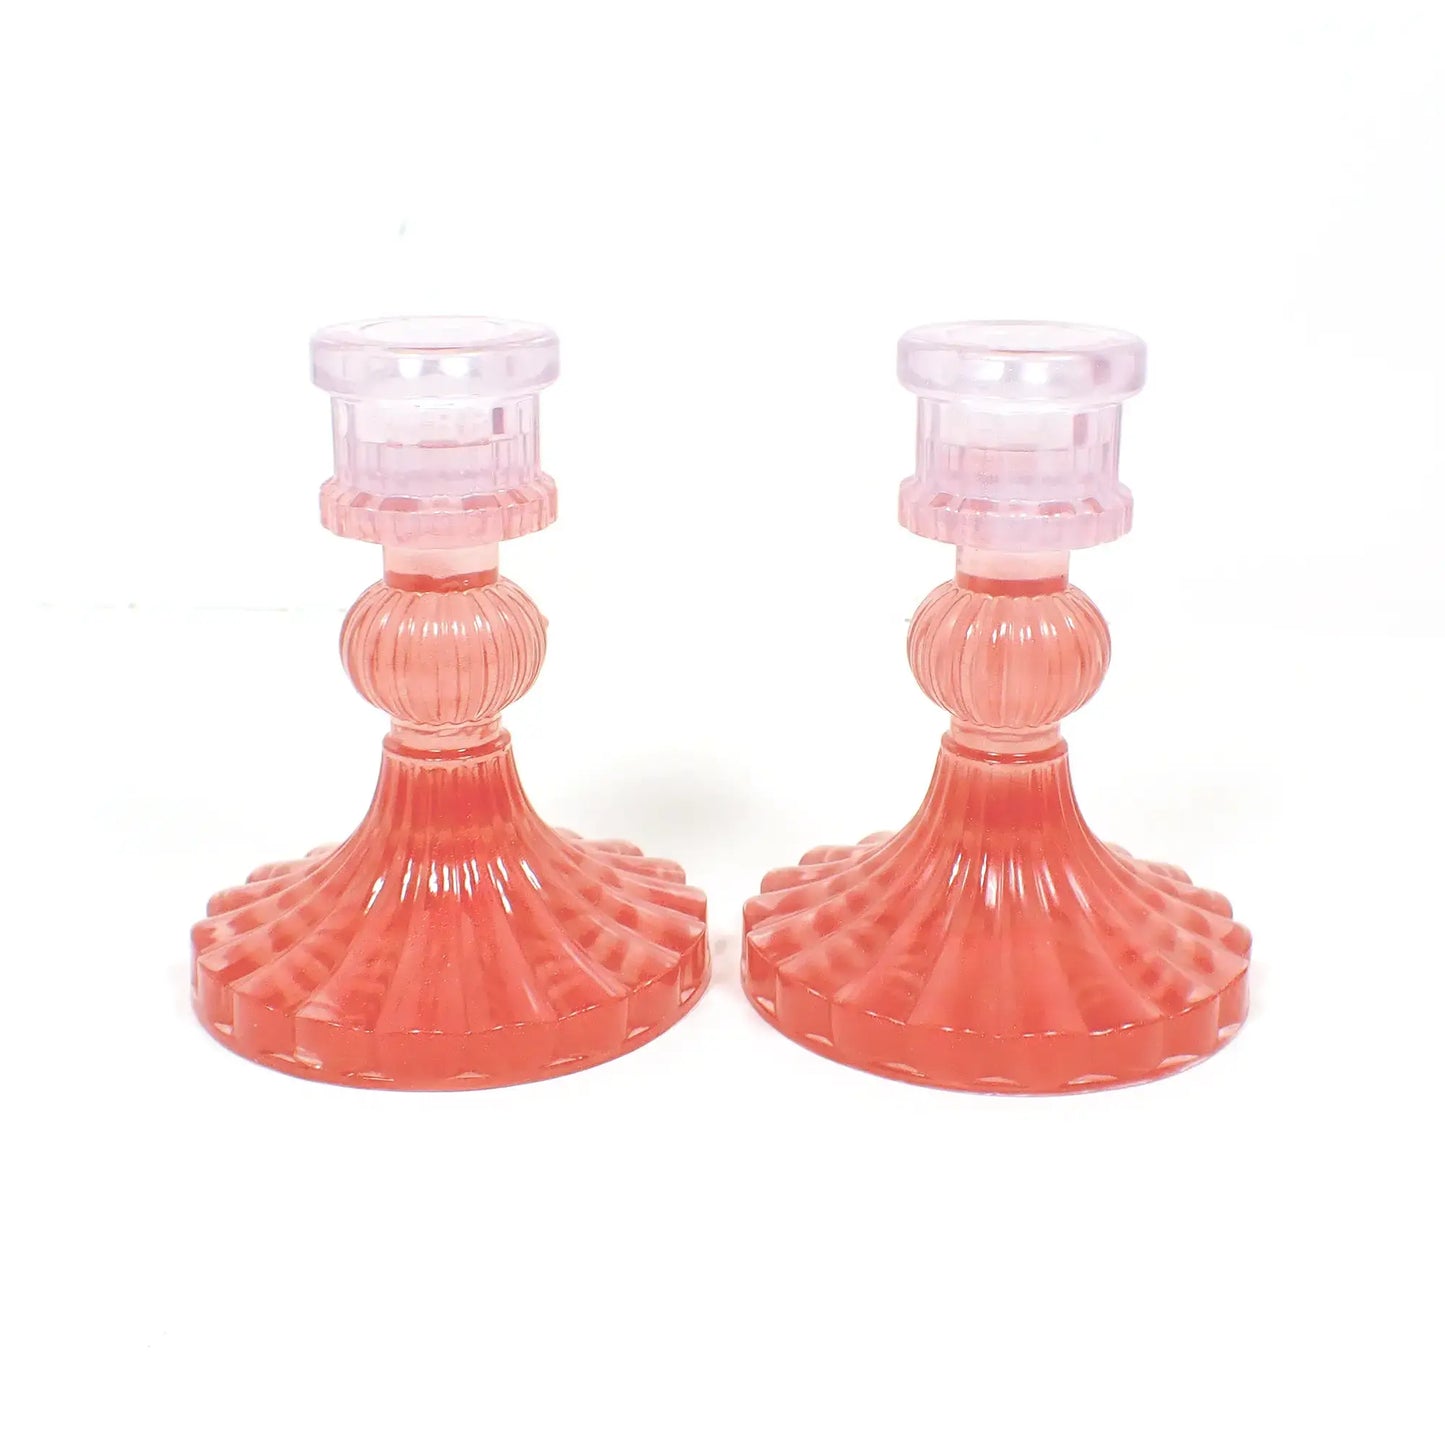 Set of Two Vintage Style Handmade Pearly Translucent Red and Purple Resin Candlestick Holders